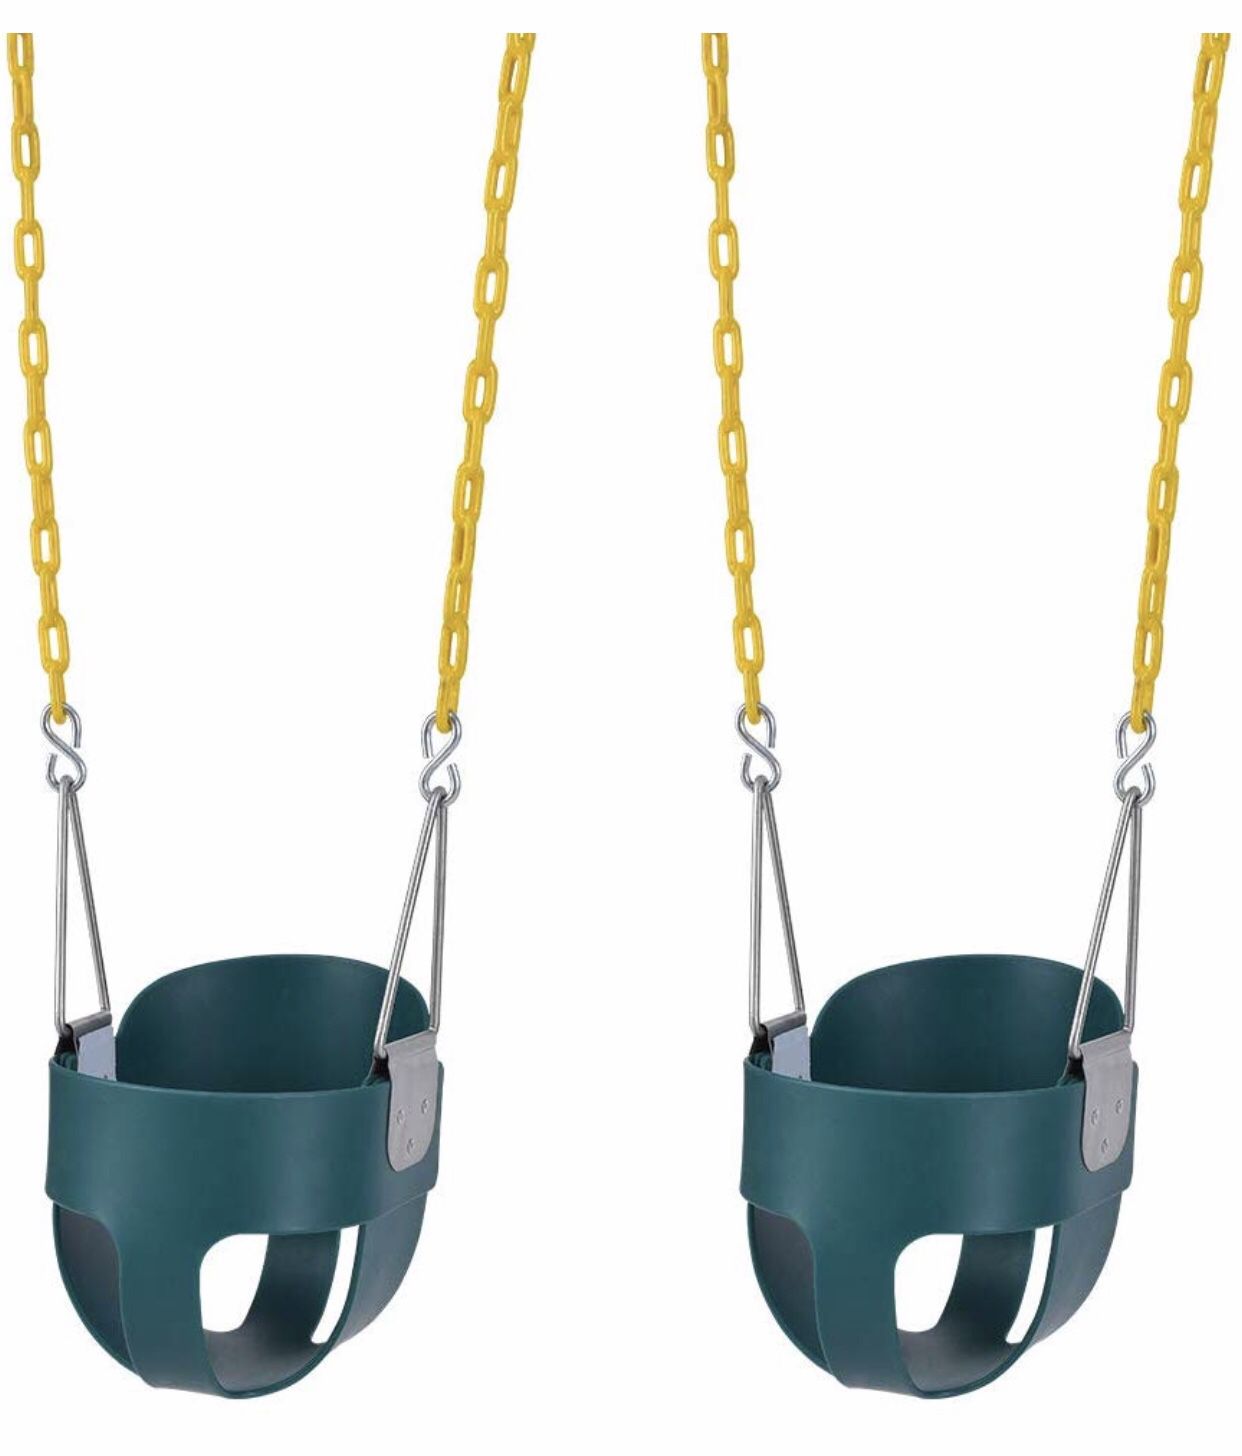 Lovely Snail 2 Pack Toddler Swing Seat-High Back Full Bucket Swing Seat with 66" Plastic Coated Chains